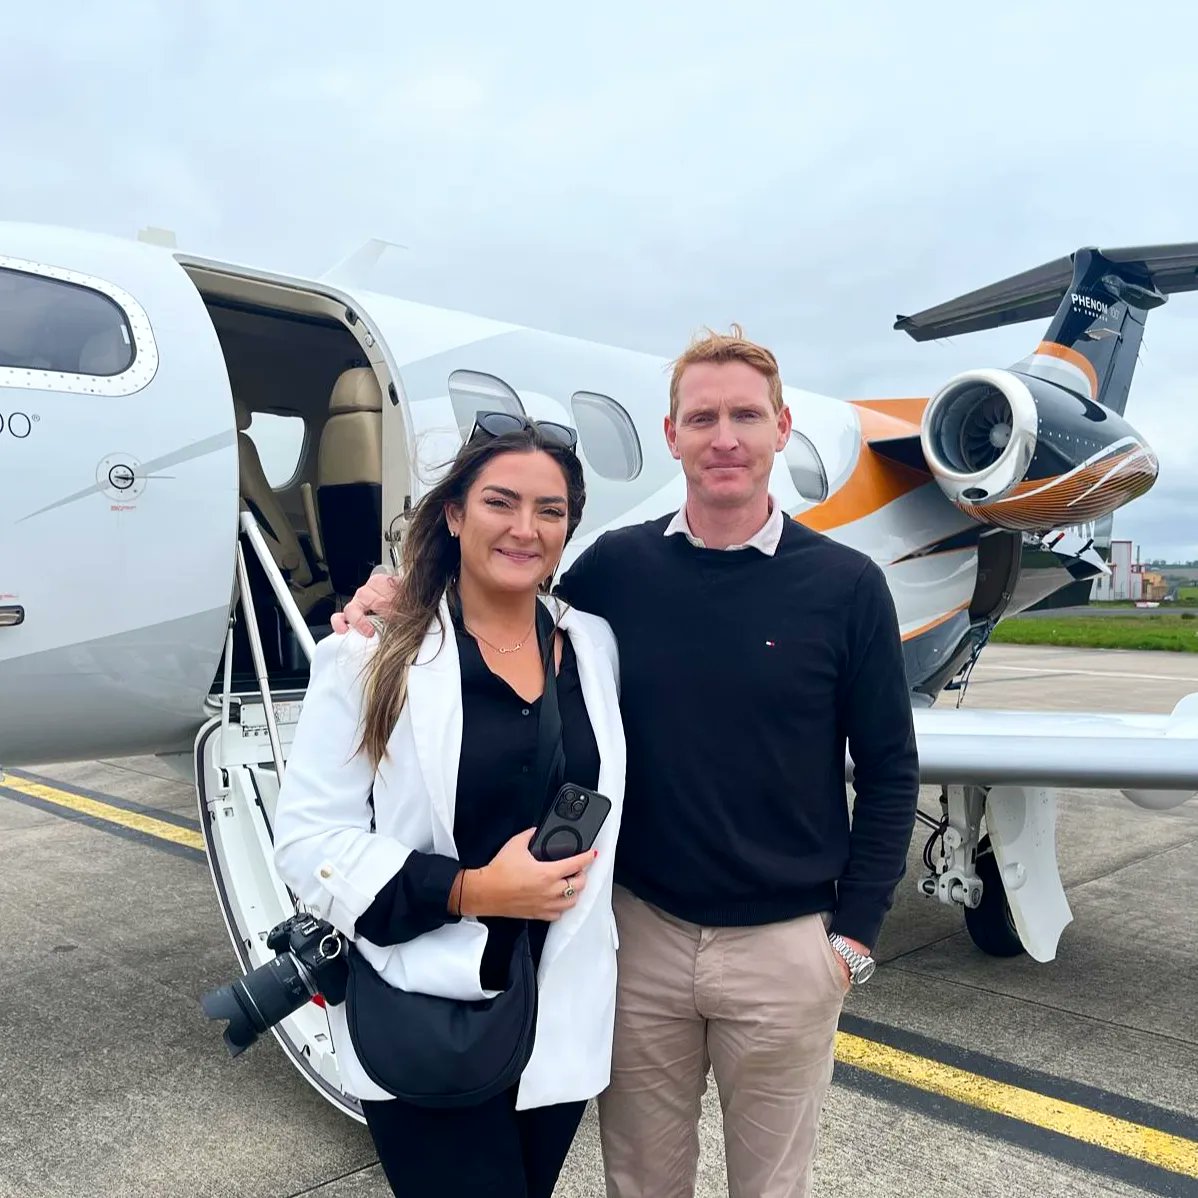 We were proud to welcome showjumping champion & prospect Team Ireland Olympian, Daniel Coyle from Derry~Londonderry, and Emma McCabe of @EpicManage this morning, as they jet off to the Netherlands for Daniel's next leg of training.🏇 #CityofDerryAirport #TeamIreland #SupportLocal